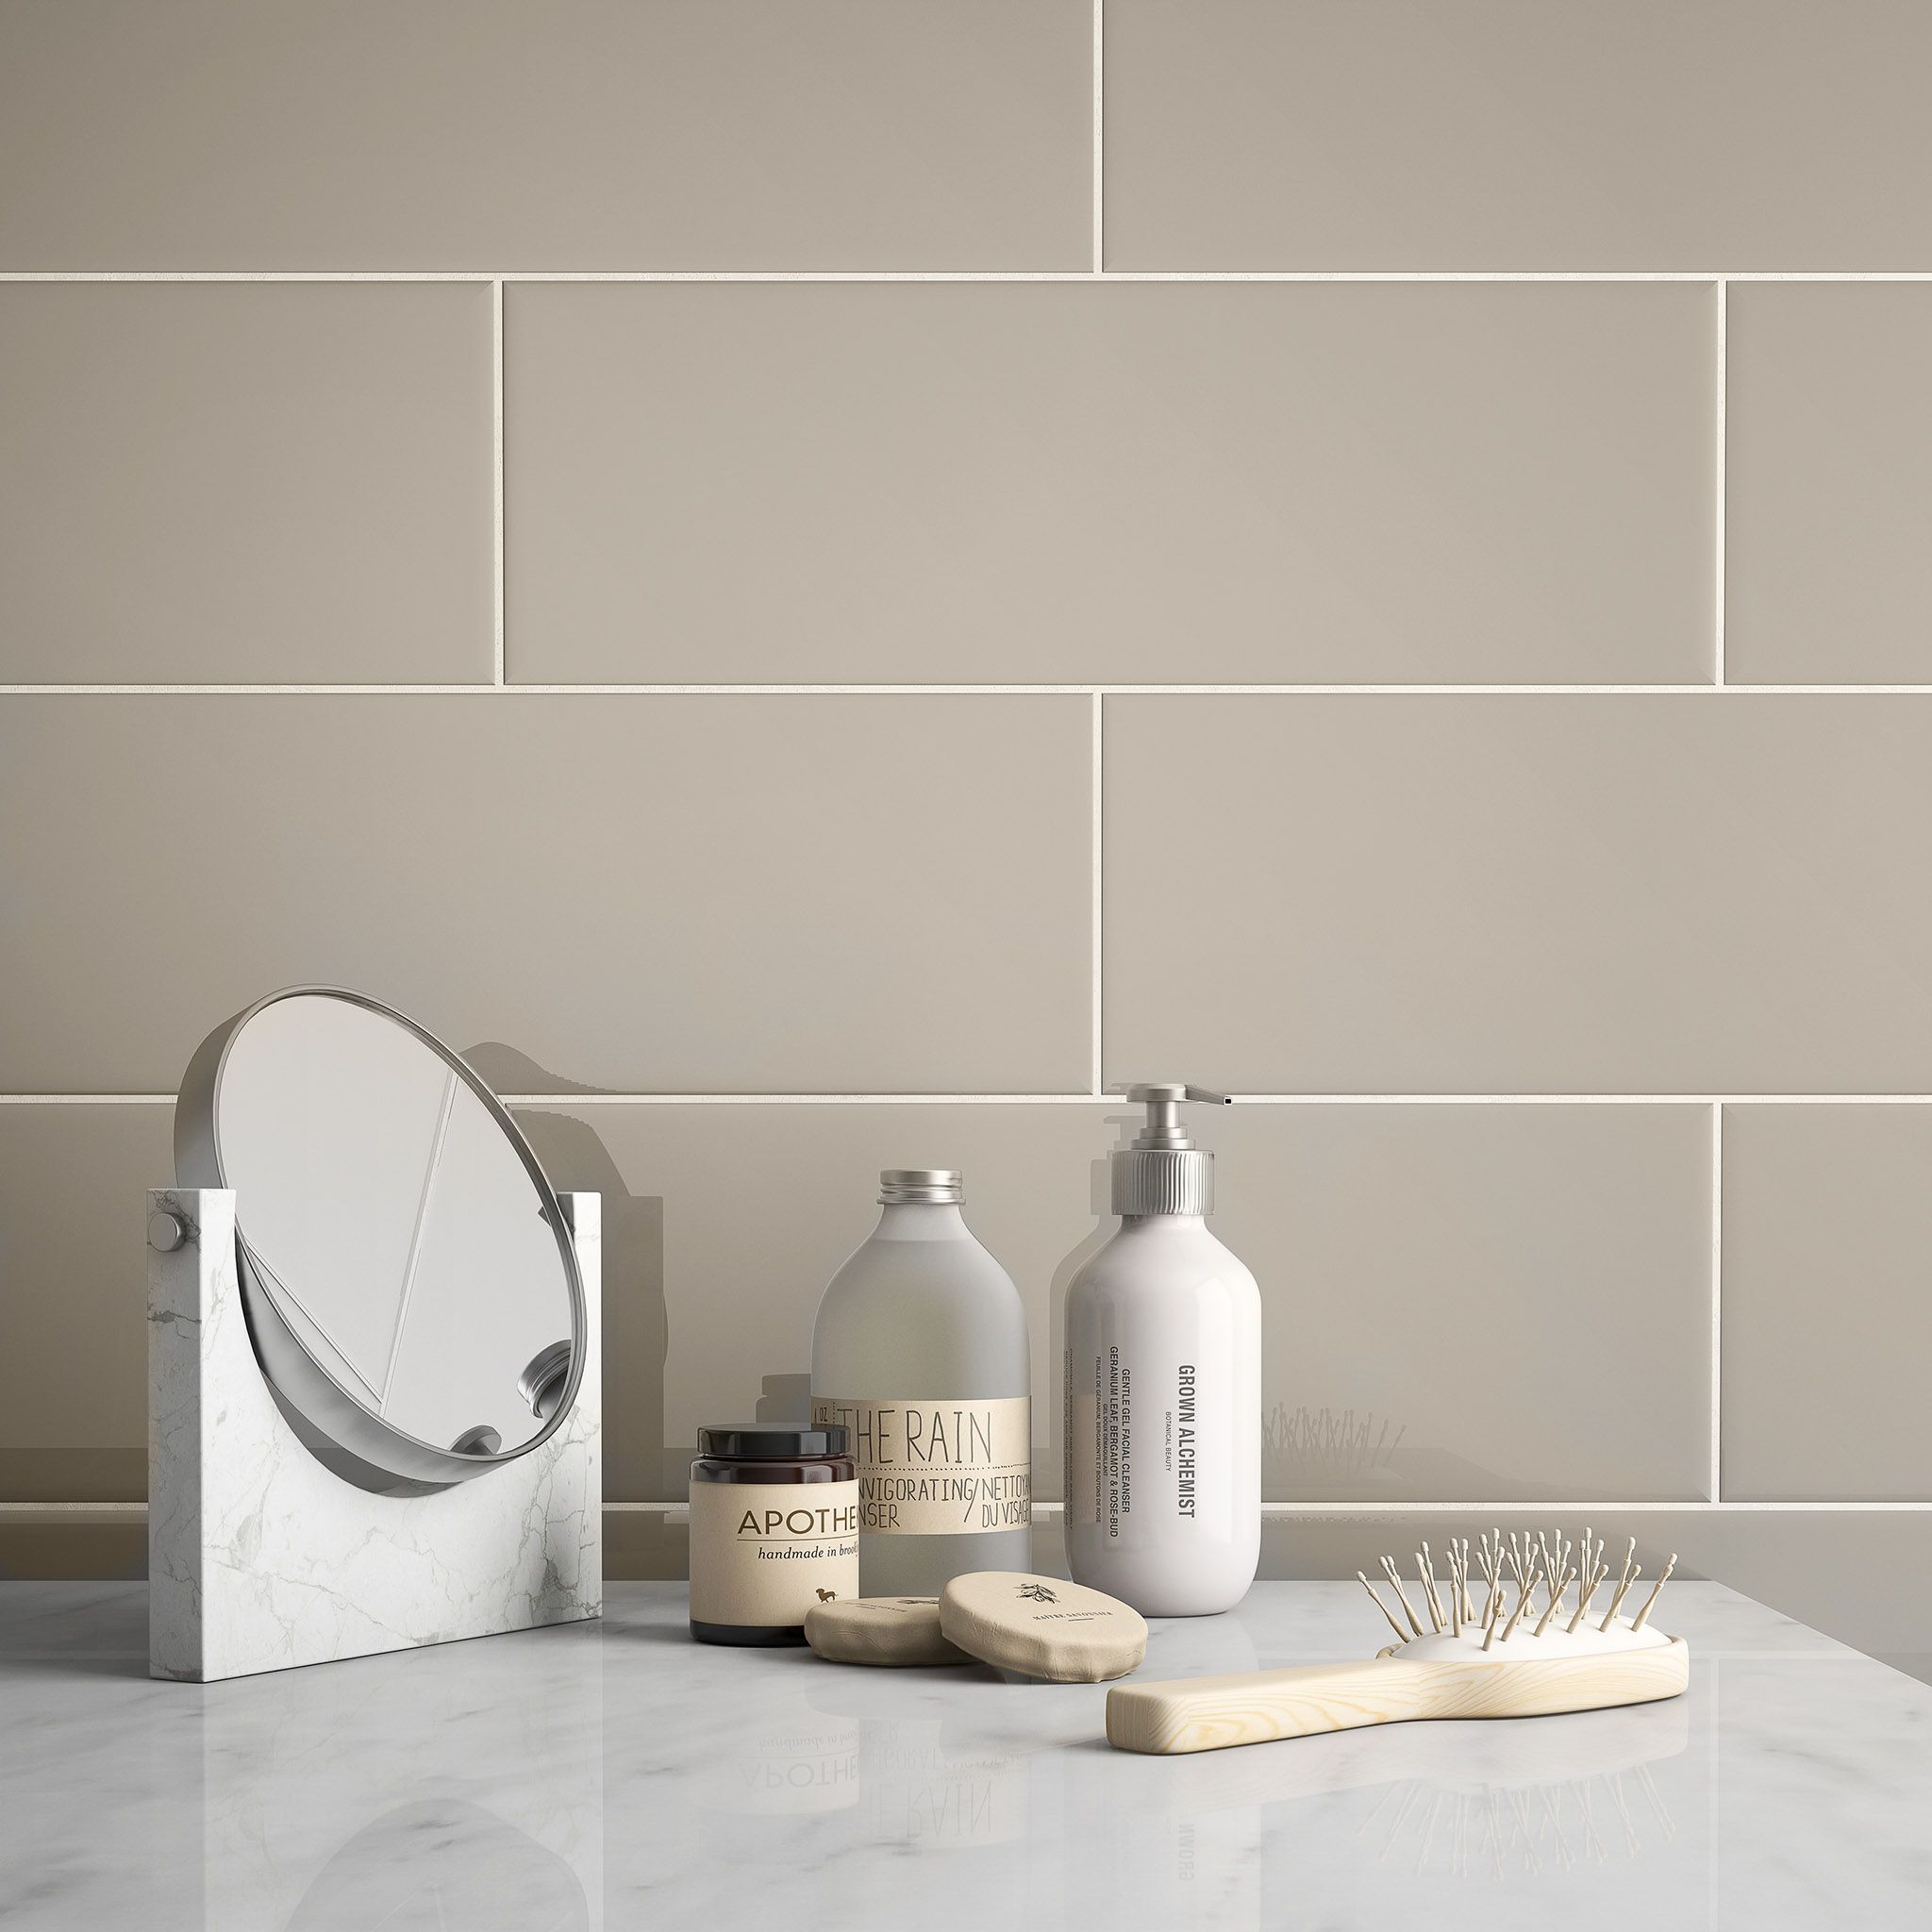 Subway Tile dates back to the early 1900’s and has a distinctive charm and character. In the right setting, it can have a traditional feel or be easily updated to a modern, sleek look.